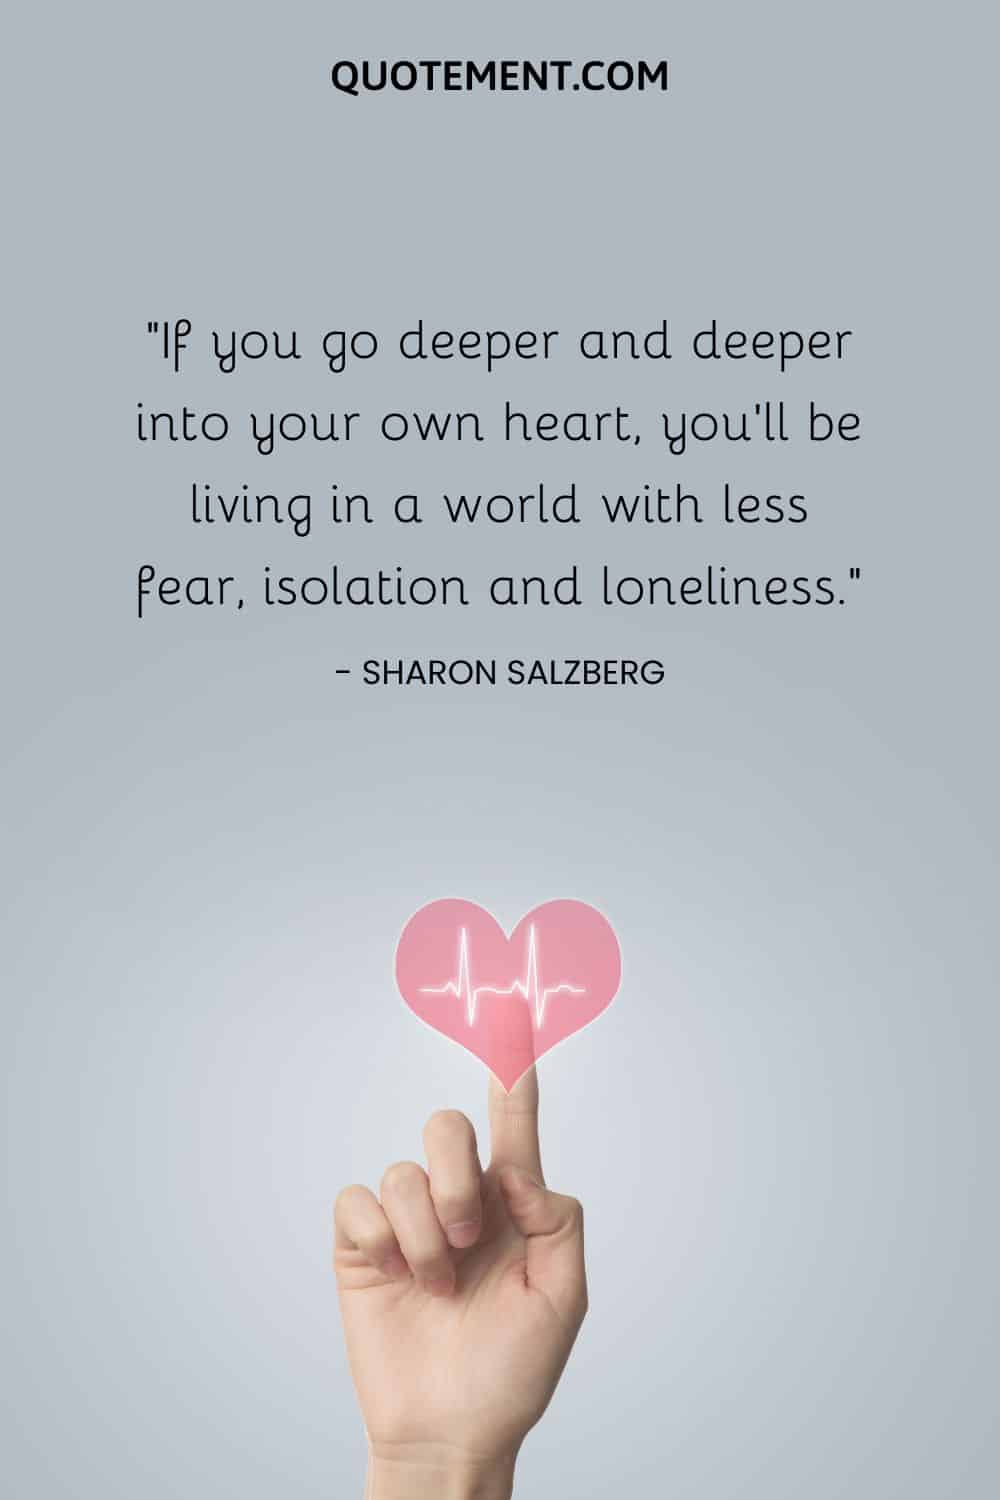 If you go deeper and deeper into your own heart, you’ll be living in a world with less fear